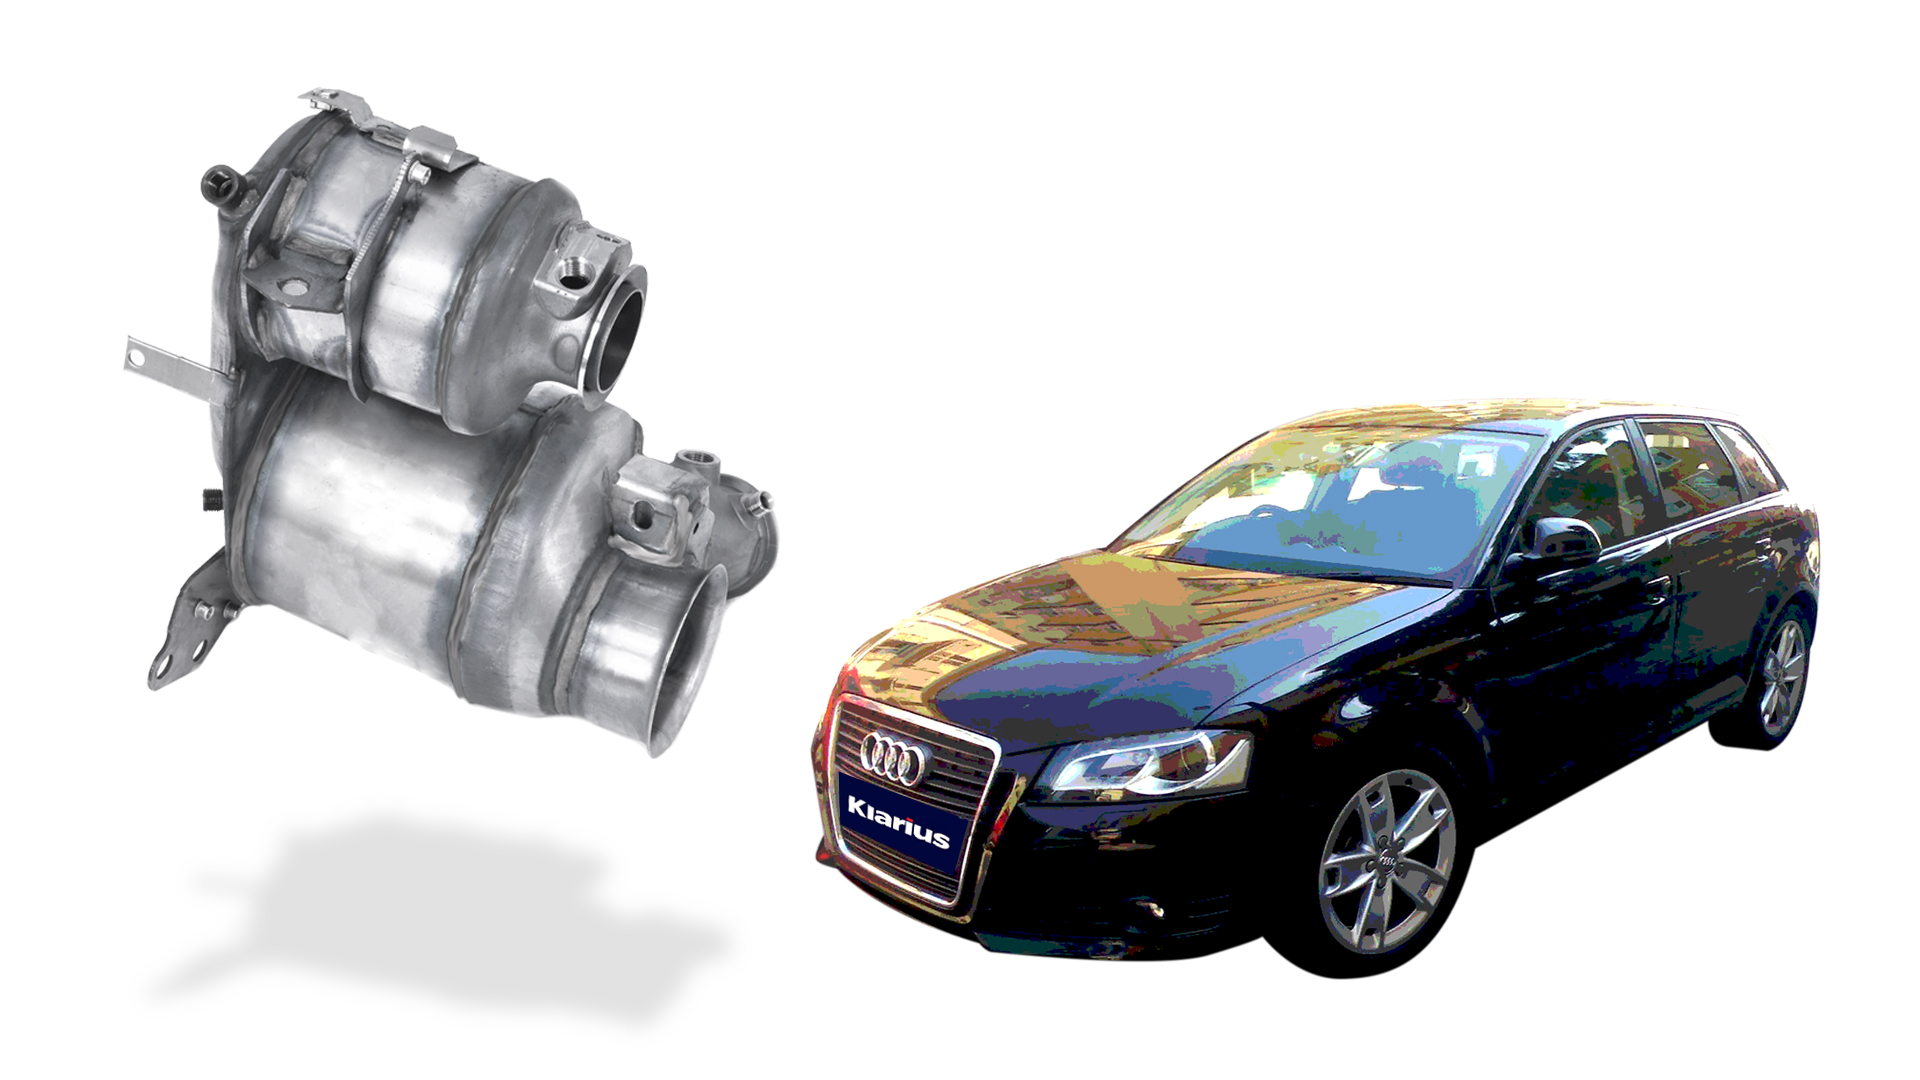 Klarius has added new diesel particulate filters for the Audi A3 to its range